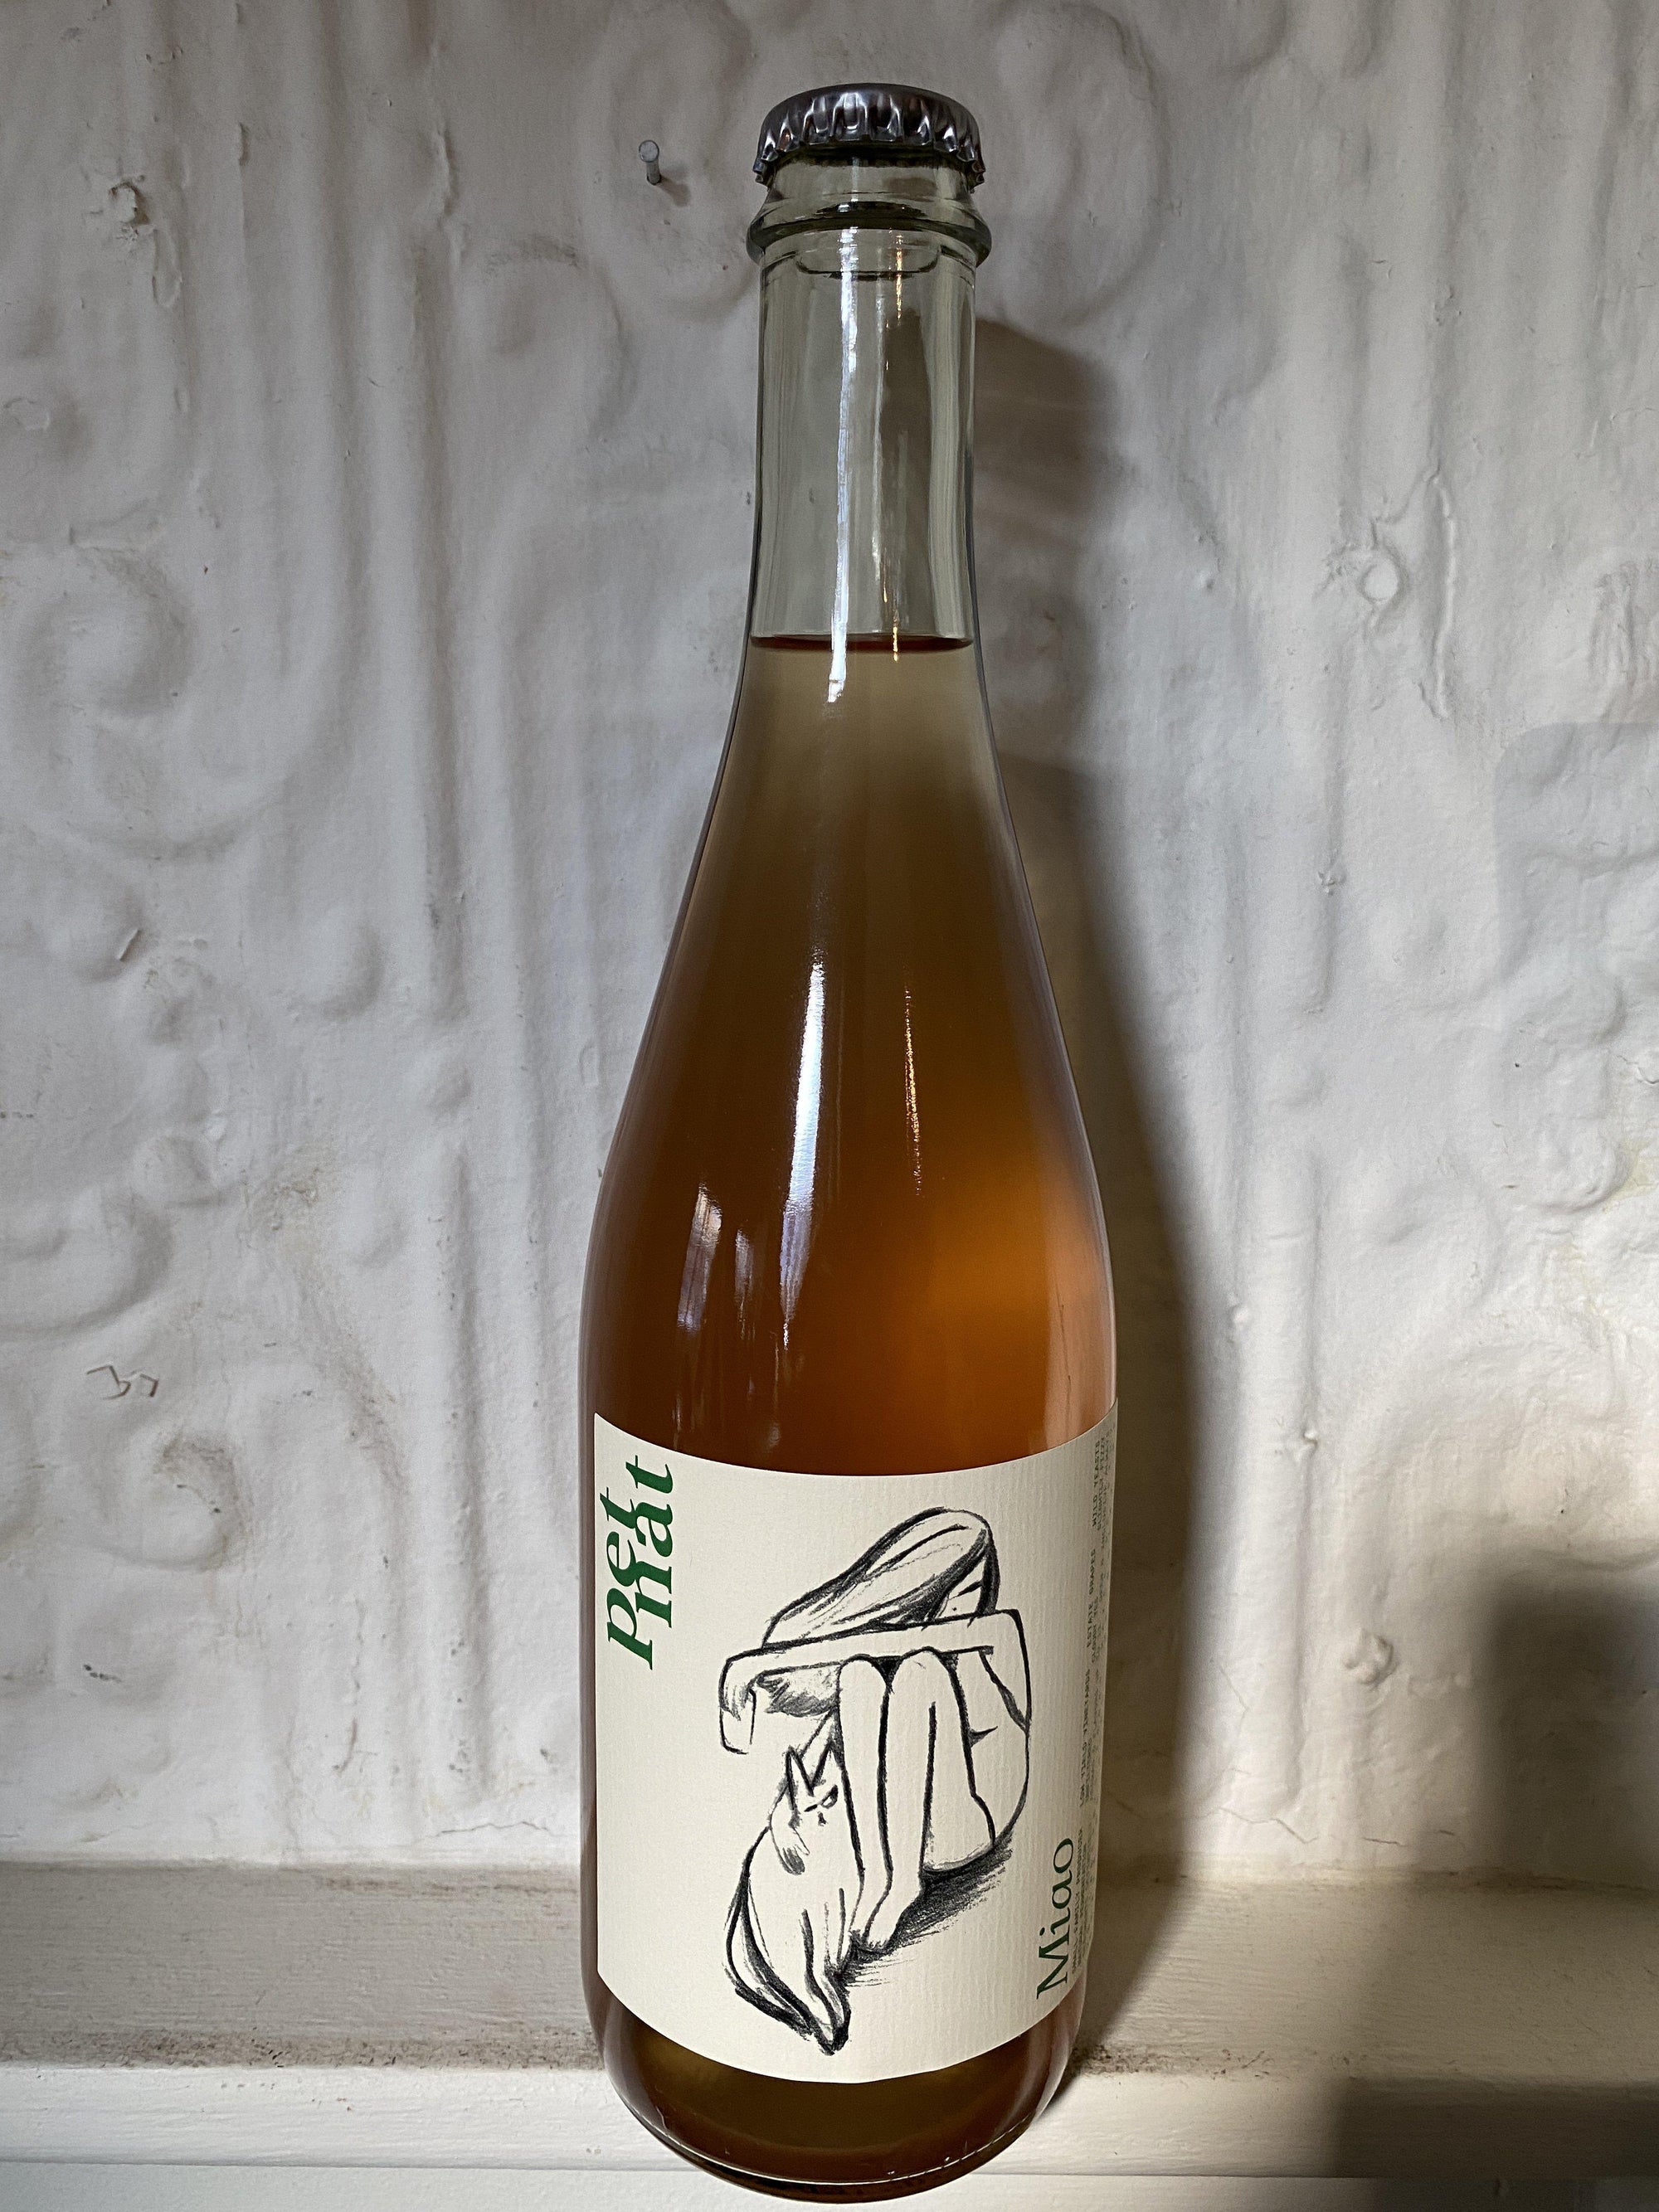 Miao Pet Nat Rose, Vina Echevarria 2020 (Curico Valley, Chile)-Wine-Bibber & Bell